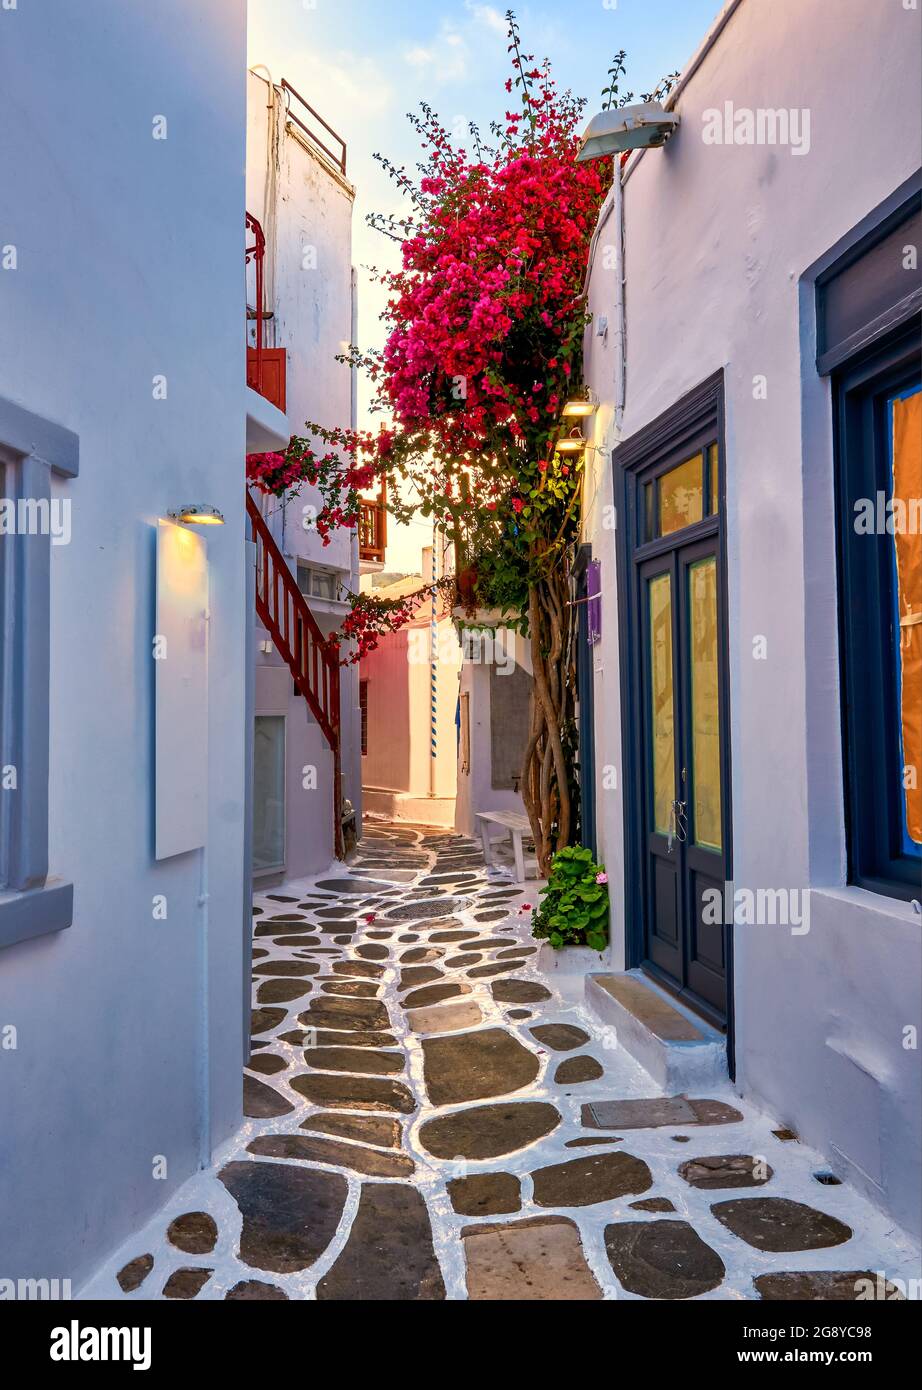 Beautiful traditional narrow cobbled alleys of Greek island towns. Whitewashed houses, shops, morning summer sunshine, bougainvillea, Mykonos, Greece. Stock Photo